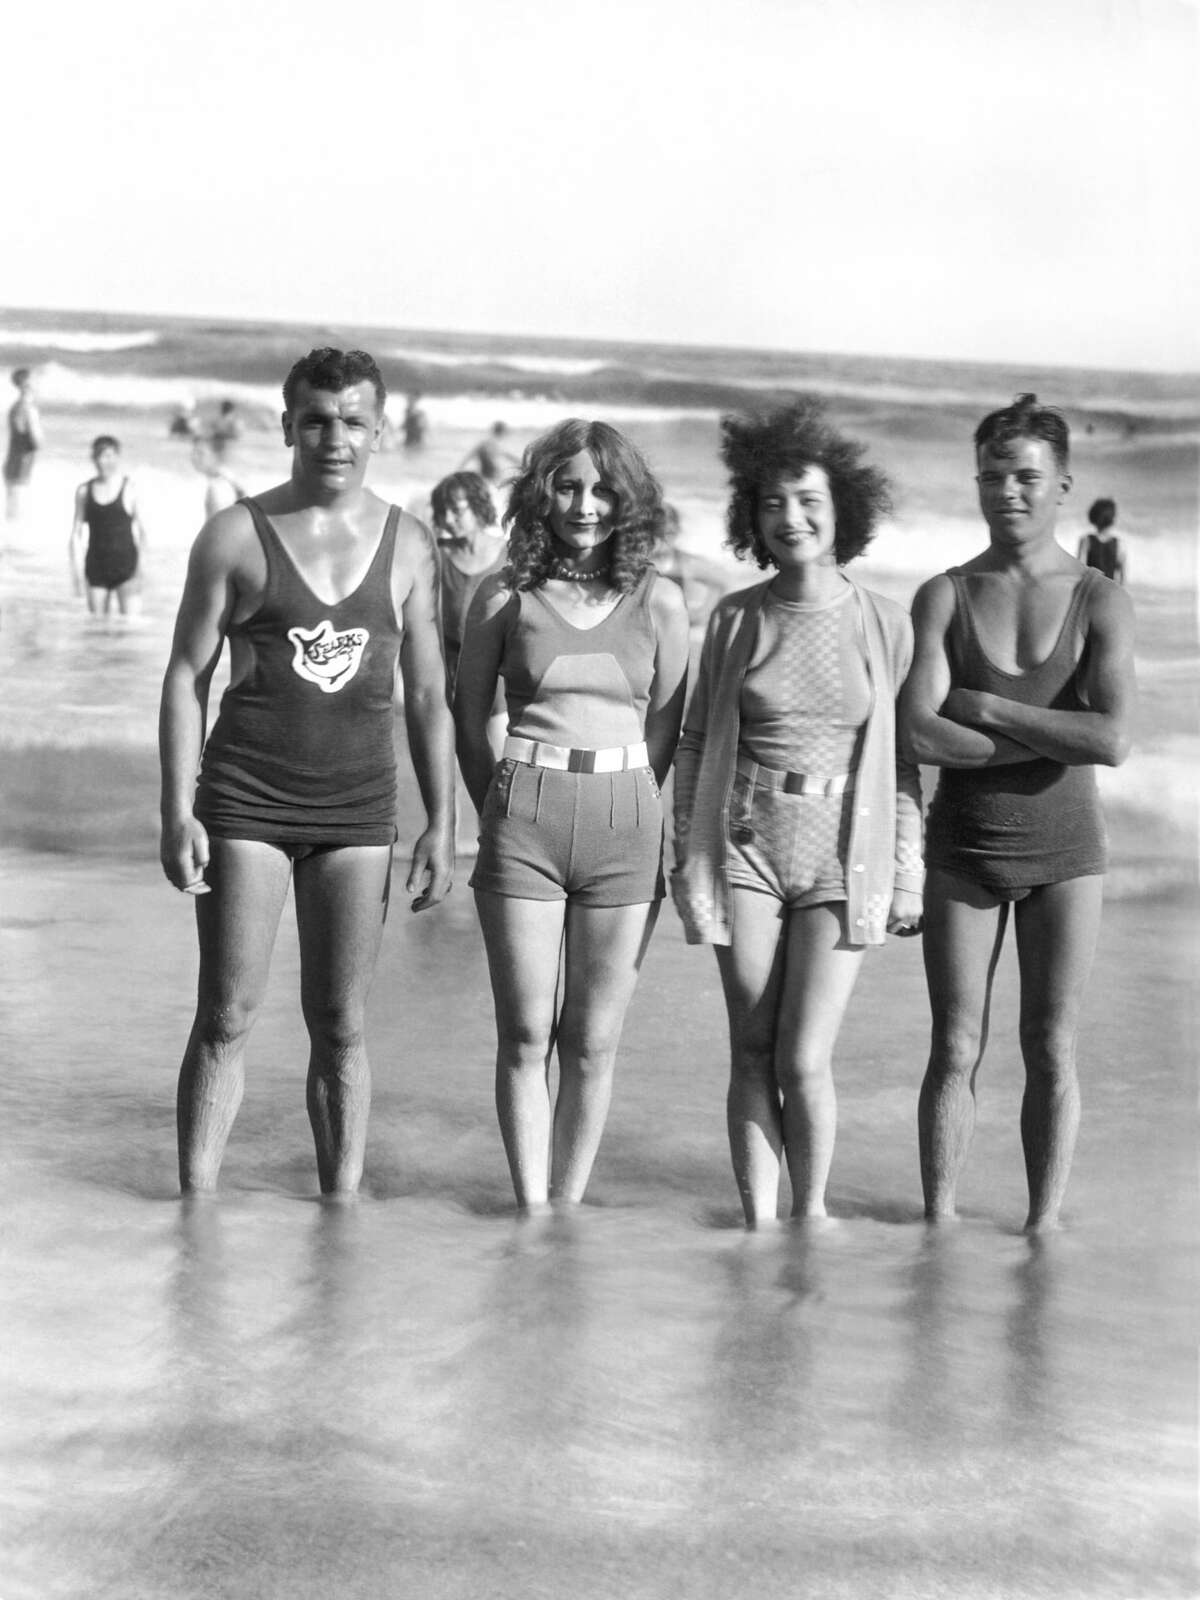 The four prize winners at the fashion parade to celebrate the official opening of the Treasure Island beach here on 'Splash Sunday', Galveston, Texas, mid to late 1920s. (Photo by Underwood Archives/Getty Images)